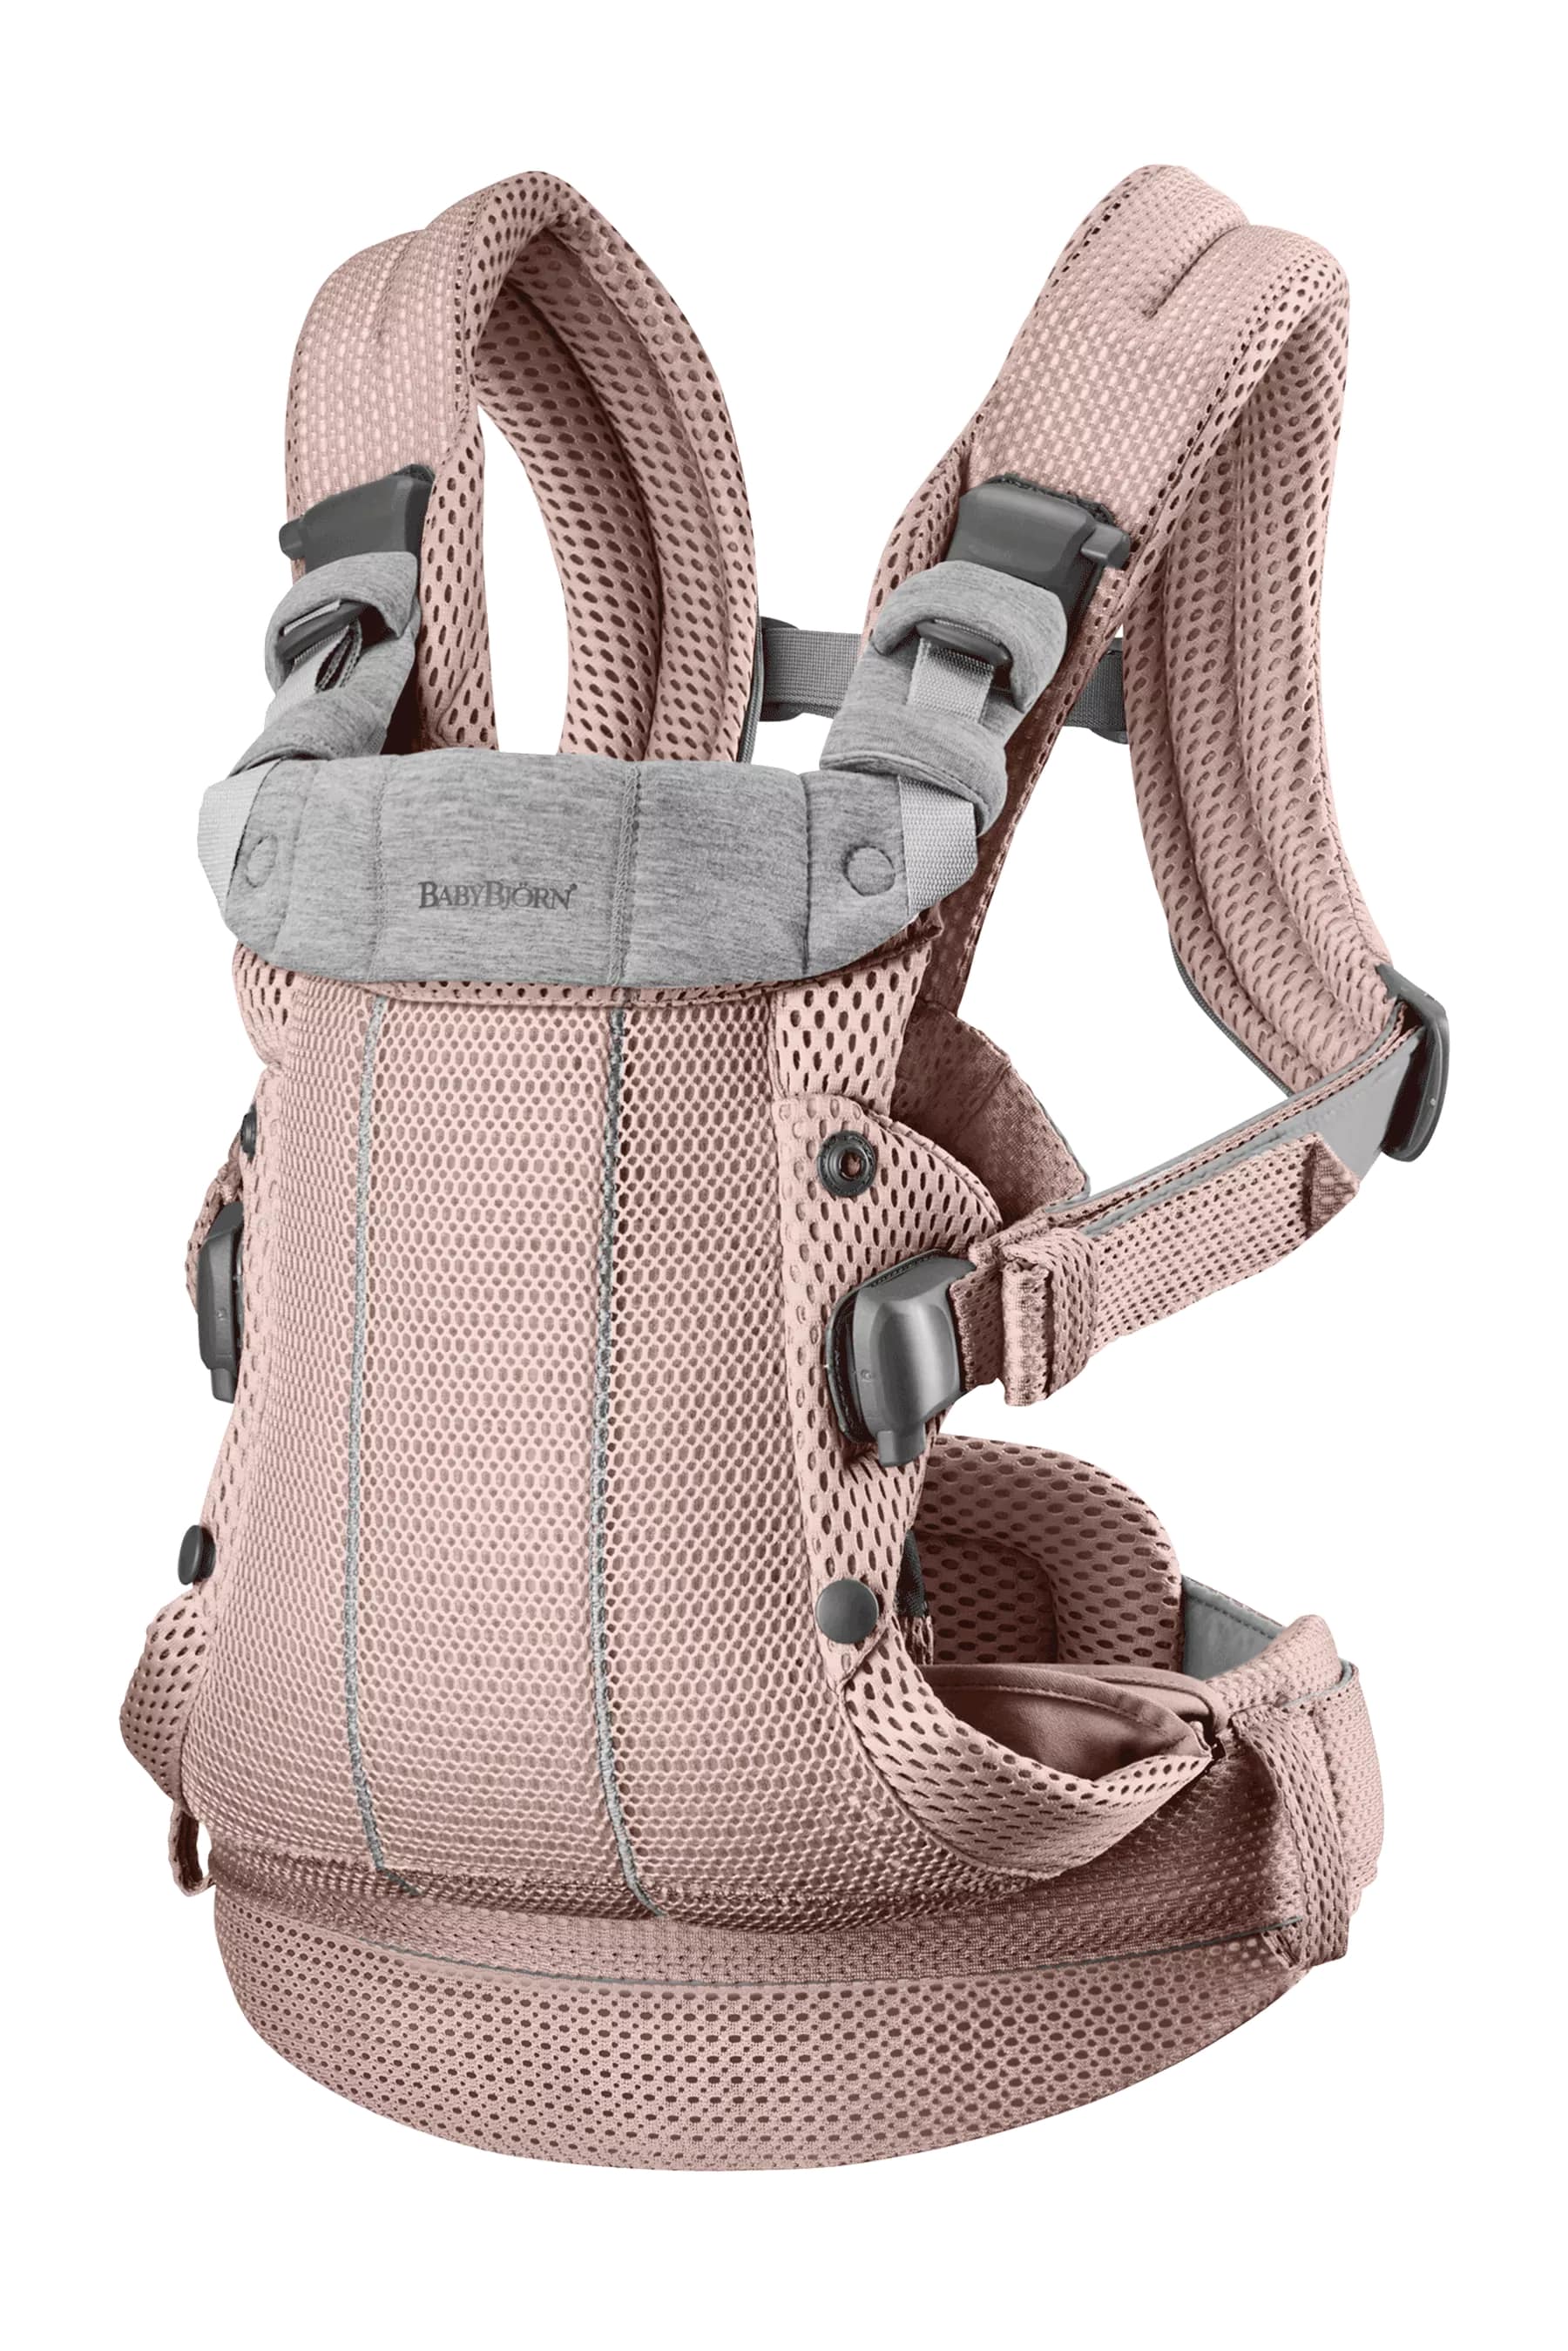 BabyBjorn Baby Carrier Harmony (3D Mesh) - Dusty Pink